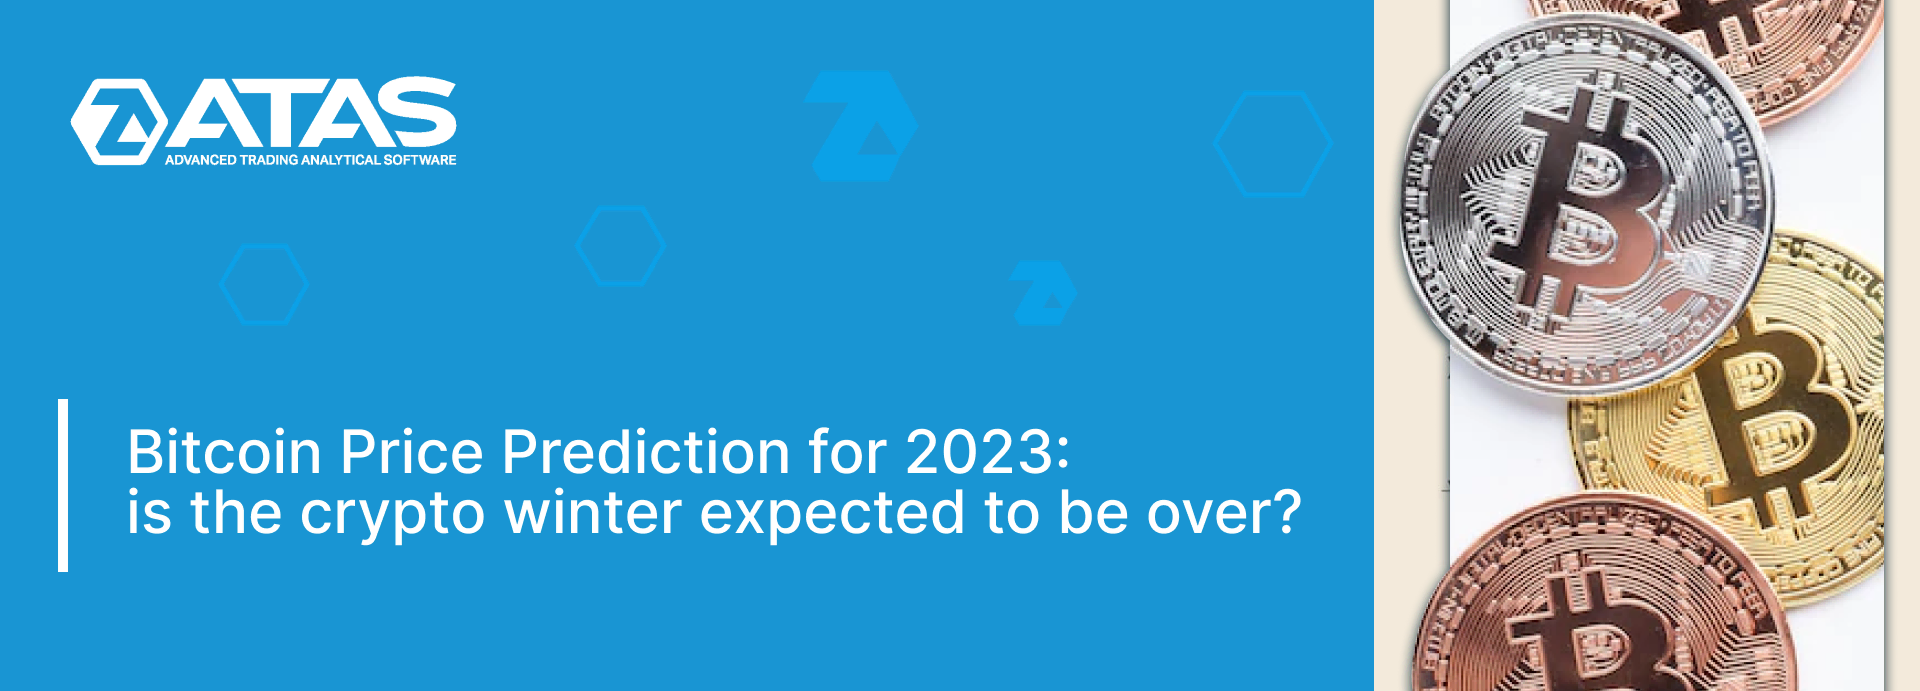 Bitcoin Price Prediction for 2023: is the crypto winter expected to be over?